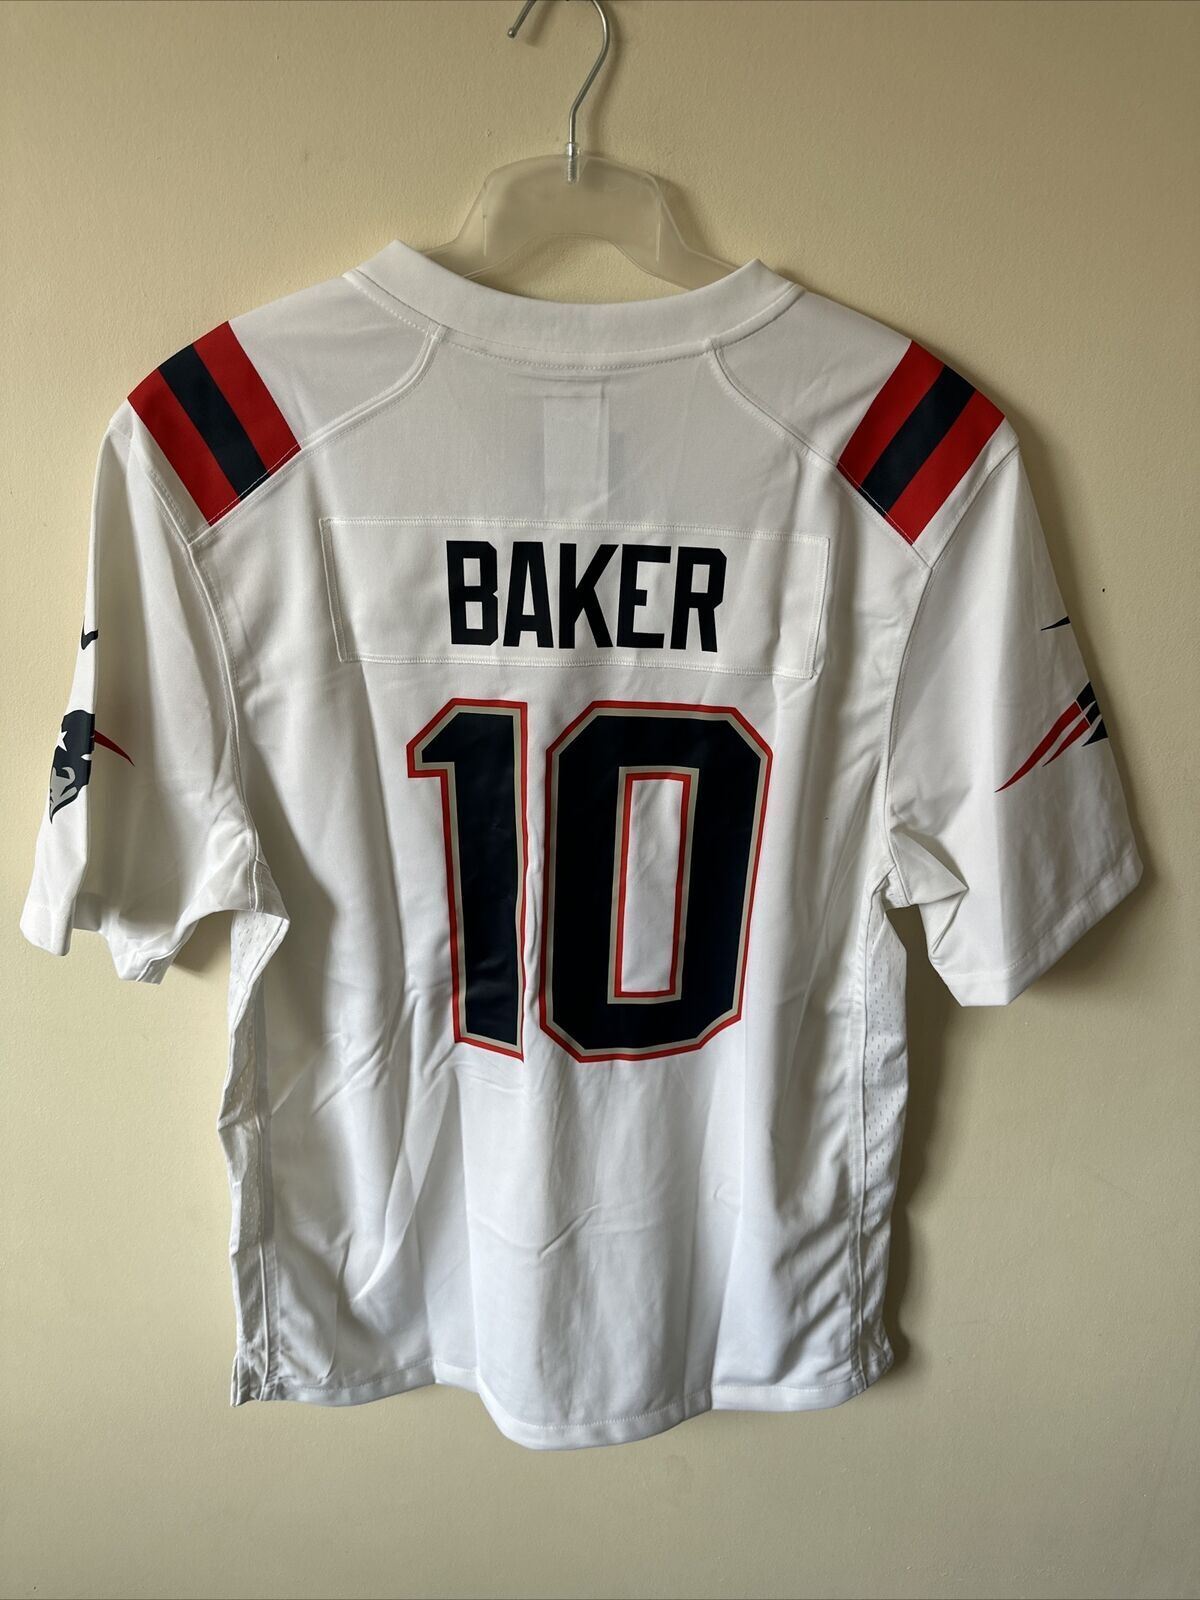 Nike NFL New England Patriots Game Road Jersey BAKER 10 Mens Size Large